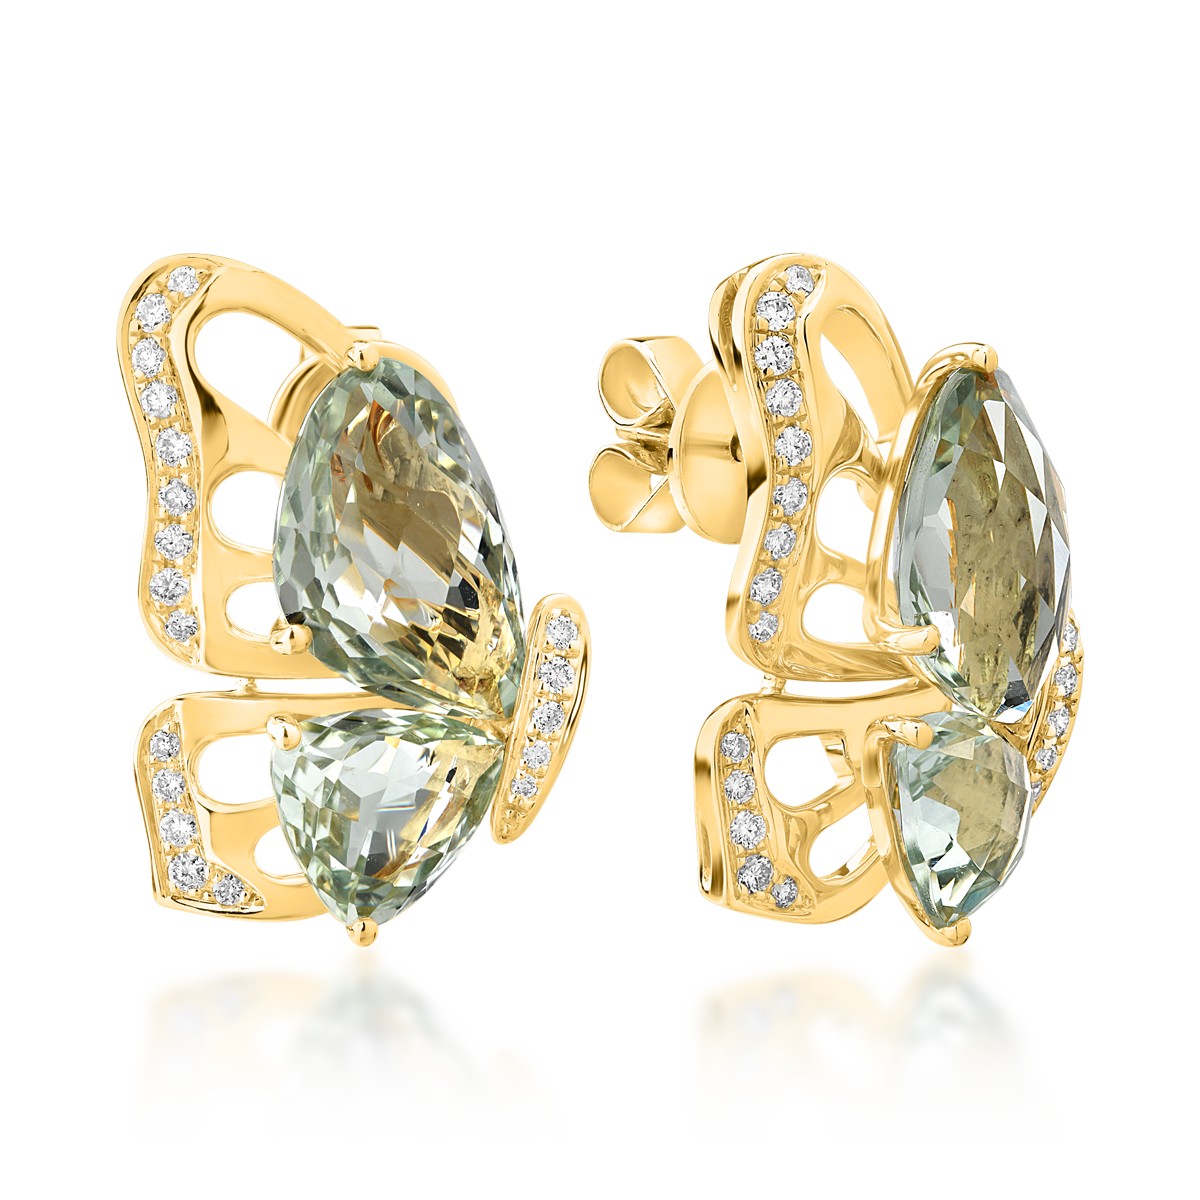 18K yellow gold butterfly earrings with green amethysts of 7.7ct and diamonds of 0.28ct